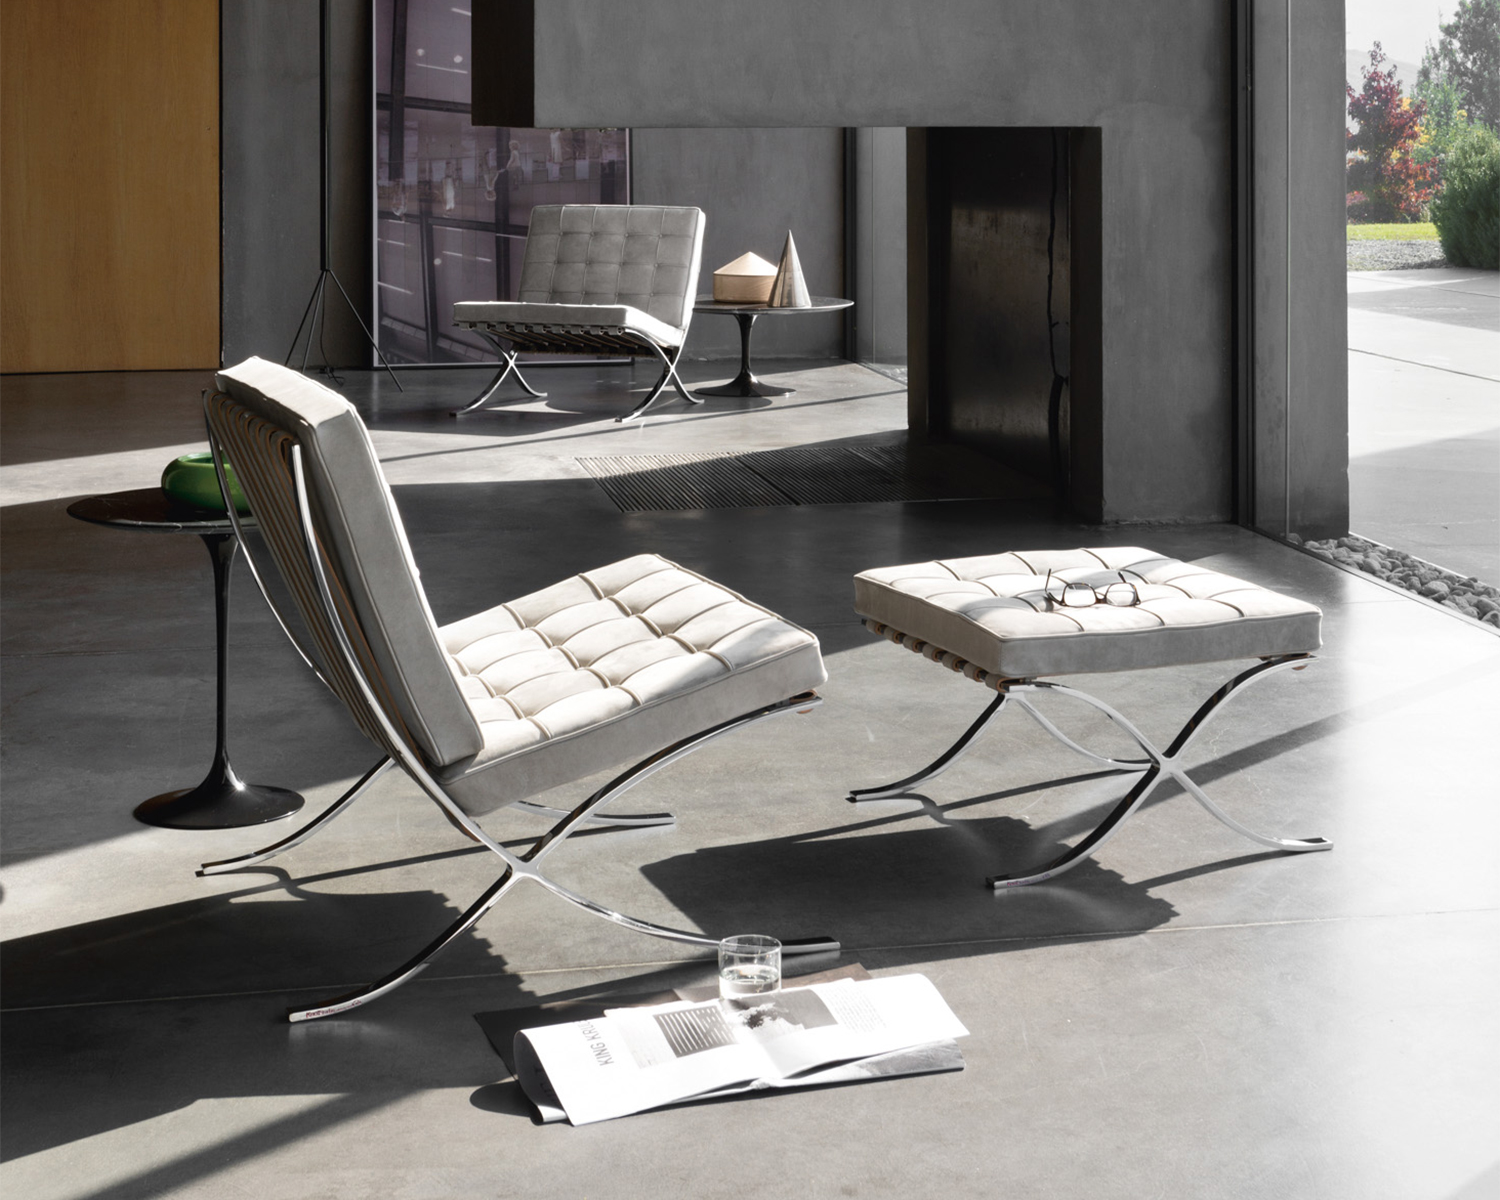 Bestsellers Womb Chair with Ottoman and Saarinen Tables